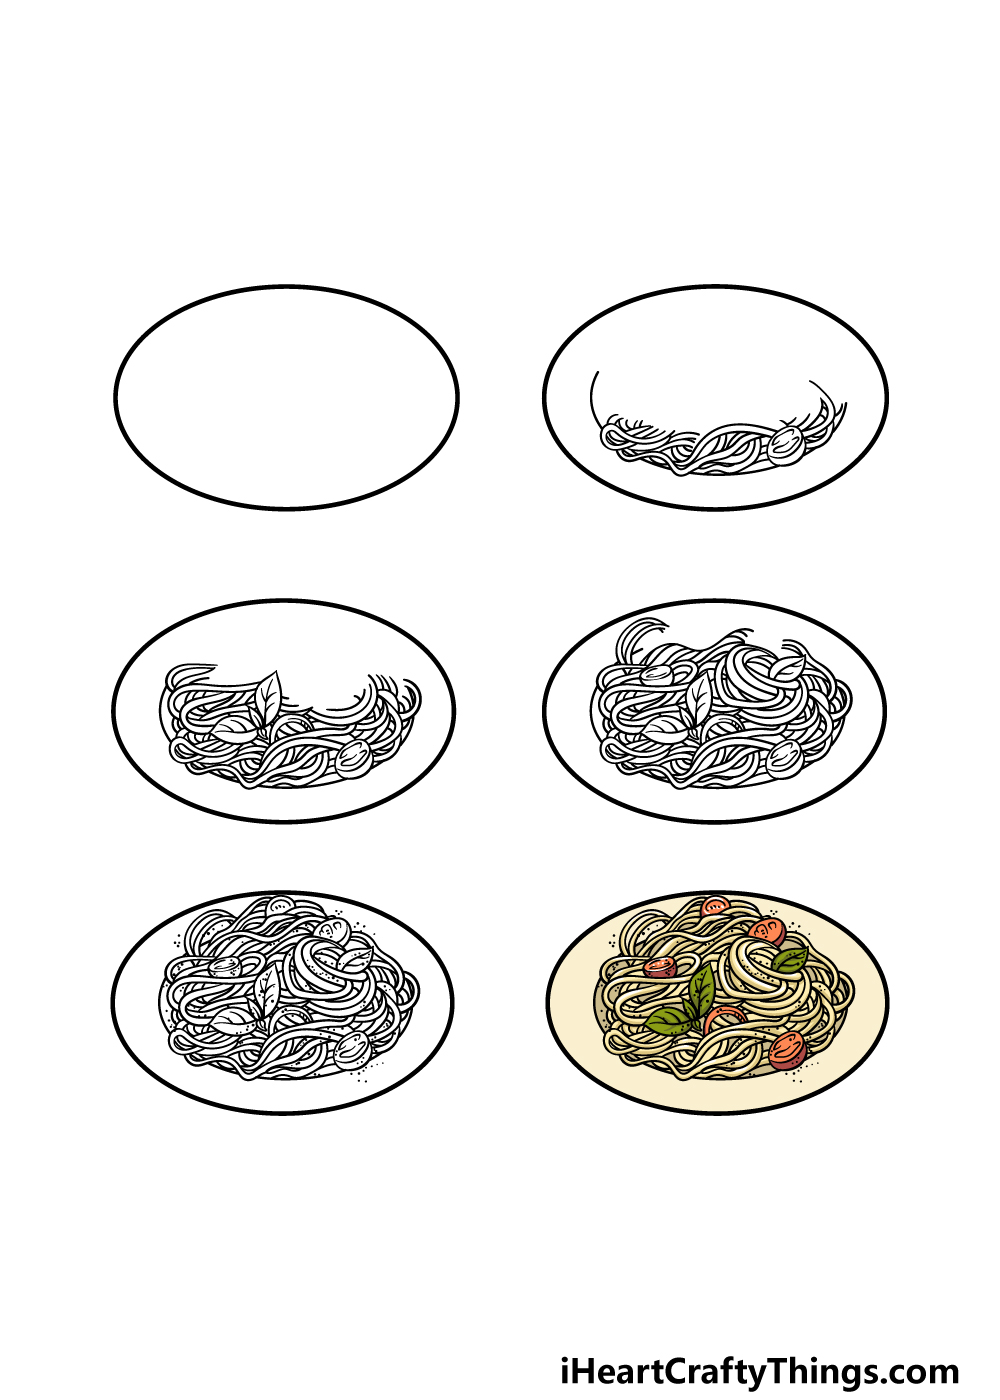 how to draw pasta in 6 steps